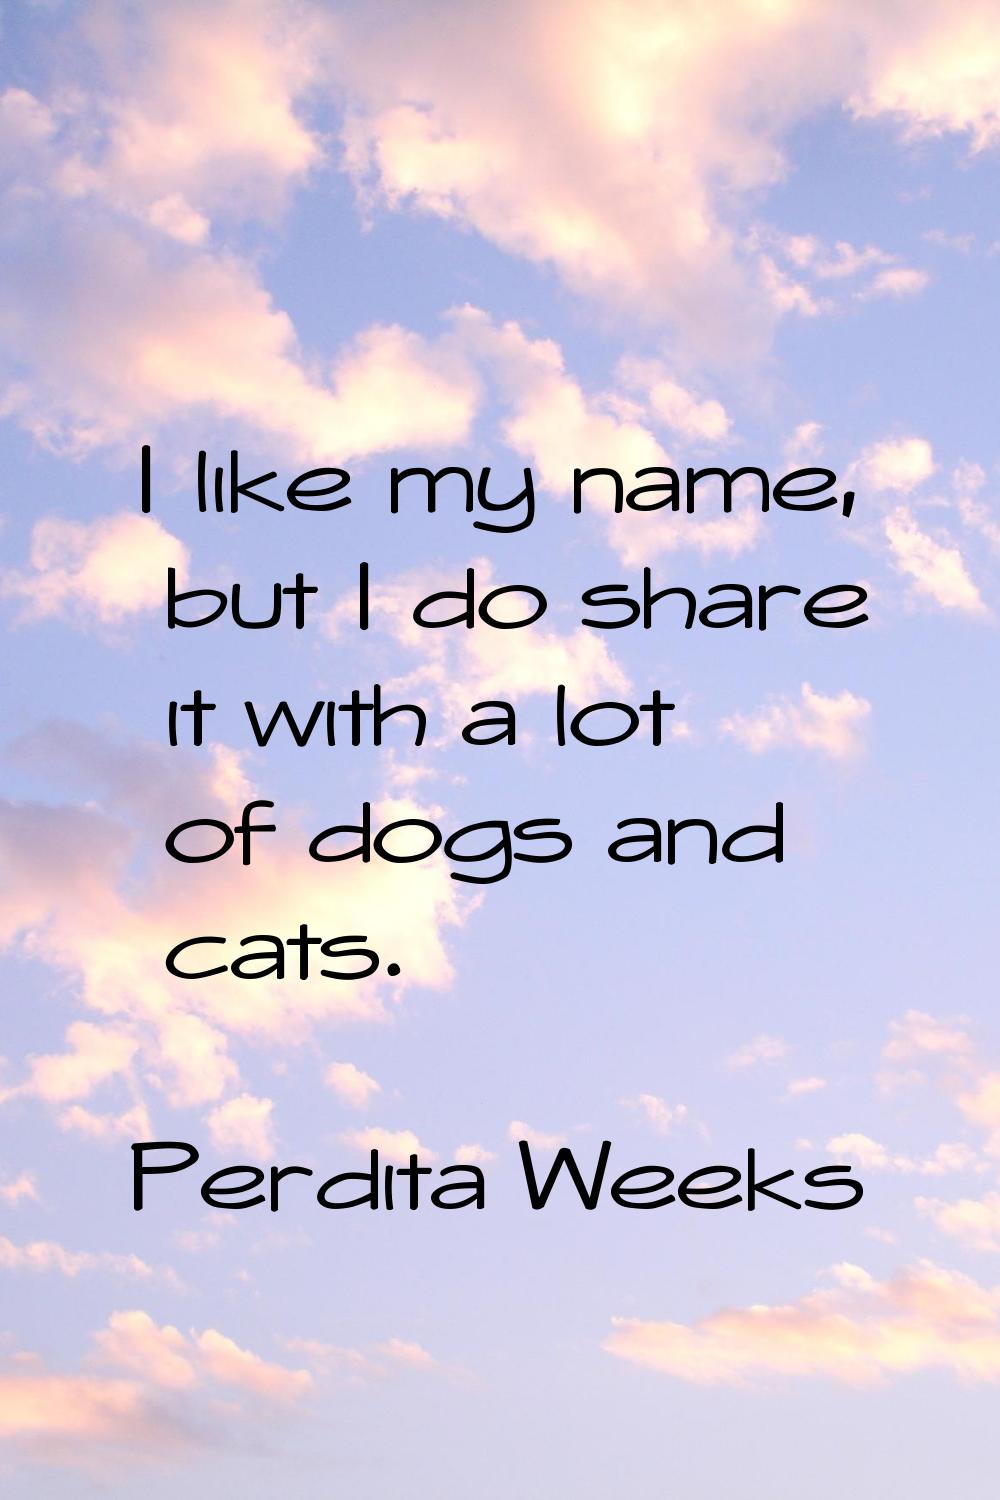 I like my name, but I do share it with a lot of dogs and cats.